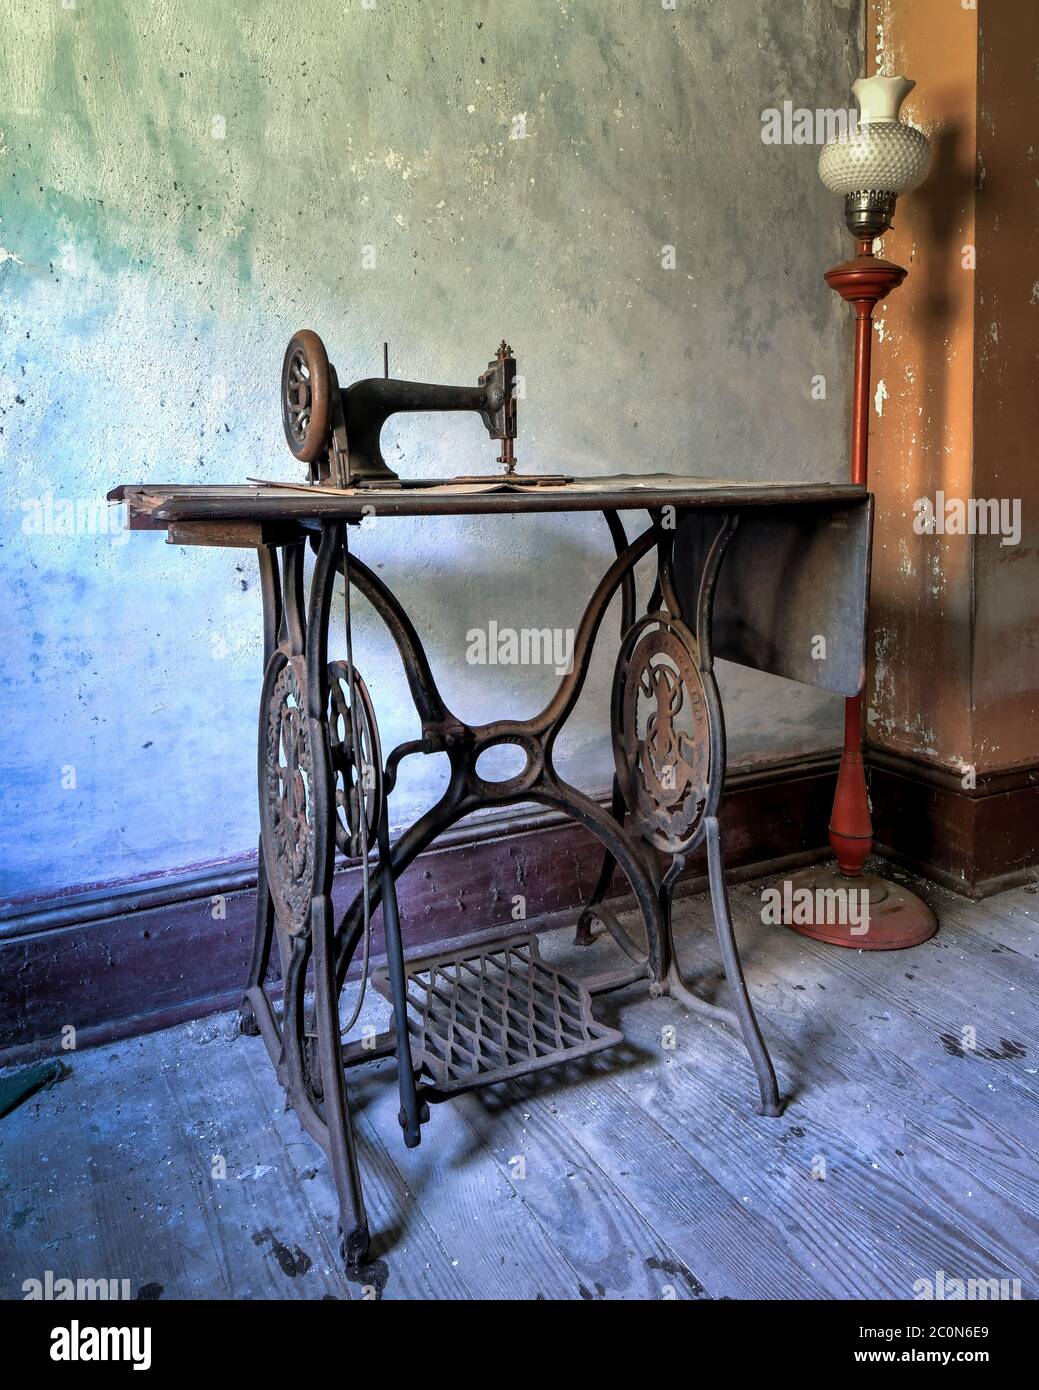 Vintage Sewing Machine in an Abandoned House Stock Photo